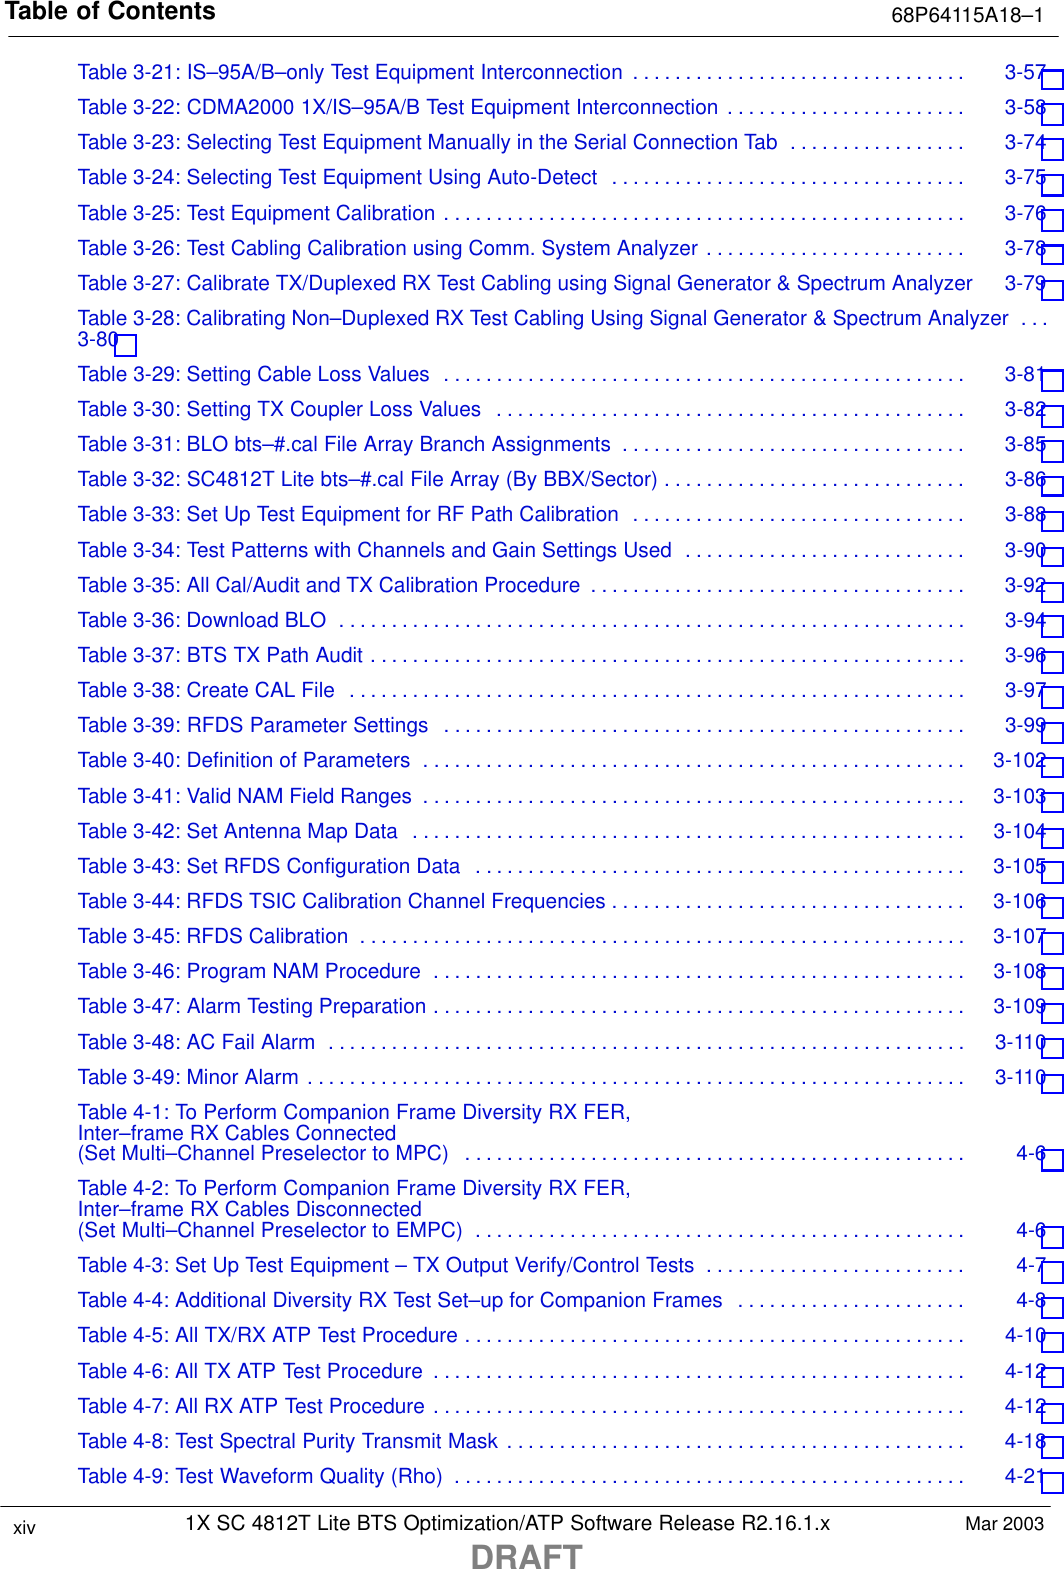 Table of Contents 68P64115A18–11X SC 4812T Lite BTS Optimization/ATP Software Release R2.16.1.xDRAFTxiv Mar 2003Table 3-21: IS–95A/B–only Test Equipment Interconnection 3-57 . . . . . . . . . . . . . . . . . . . . . . . . . . . . . . . . Table 3-22: CDMA2000 1X/IS–95A/B Test Equipment Interconnection 3-58 . . . . . . . . . . . . . . . . . . . . . . . Table 3-23: Selecting Test Equipment Manually in the Serial Connection Tab 3-74 . . . . . . . . . . . . . . . . . Table 3-24: Selecting Test Equipment Using Auto-Detect 3-75 . . . . . . . . . . . . . . . . . . . . . . . . . . . . . . . . . . Table 3-25: Test Equipment Calibration 3-76 . . . . . . . . . . . . . . . . . . . . . . . . . . . . . . . . . . . . . . . . . . . . . . . . . . Table 3-26: Test Cabling Calibration using Comm. System Analyzer 3-78 . . . . . . . . . . . . . . . . . . . . . . . . . Table 3-27: Calibrate TX/Duplexed RX Test Cabling using Signal Generator &amp; Spectrum Analyzer 3-79 Table 3-28: Calibrating Non–Duplexed RX Test Cabling Using Signal Generator &amp; Spectrum Analyzer . . . 3-80 Table 3-29: Setting Cable Loss Values 3-81 . . . . . . . . . . . . . . . . . . . . . . . . . . . . . . . . . . . . . . . . . . . . . . . . . . Table 3-30: Setting TX Coupler Loss Values 3-82 . . . . . . . . . . . . . . . . . . . . . . . . . . . . . . . . . . . . . . . . . . . . . Table 3-31: BLO bts–#.cal File Array Branch Assignments 3-85 . . . . . . . . . . . . . . . . . . . . . . . . . . . . . . . . . Table 3-32: SC4812T Lite bts–#.cal File Array (By BBX/Sector) 3-86 . . . . . . . . . . . . . . . . . . . . . . . . . . . . . Table 3-33: Set Up Test Equipment for RF Path Calibration 3-88 . . . . . . . . . . . . . . . . . . . . . . . . . . . . . . . . Table 3-34: Test Patterns with Channels and Gain Settings Used 3-90 . . . . . . . . . . . . . . . . . . . . . . . . . . . Table 3-35: All Cal/Audit and TX Calibration Procedure 3-92 . . . . . . . . . . . . . . . . . . . . . . . . . . . . . . . . . . . . Table 3-36: Download BLO 3-94 . . . . . . . . . . . . . . . . . . . . . . . . . . . . . . . . . . . . . . . . . . . . . . . . . . . . . . . . . . . . Table 3-37: BTS TX Path Audit 3-96 . . . . . . . . . . . . . . . . . . . . . . . . . . . . . . . . . . . . . . . . . . . . . . . . . . . . . . . . . Table 3-38: Create CAL File 3-97 . . . . . . . . . . . . . . . . . . . . . . . . . . . . . . . . . . . . . . . . . . . . . . . . . . . . . . . . . . . Table 3-39: RFDS Parameter Settings 3-99 . . . . . . . . . . . . . . . . . . . . . . . . . . . . . . . . . . . . . . . . . . . . . . . . . . Table 3-40: Definition of Parameters 3-102 . . . . . . . . . . . . . . . . . . . . . . . . . . . . . . . . . . . . . . . . . . . . . . . . . . . . Table 3-41: Valid NAM Field Ranges 3-103 . . . . . . . . . . . . . . . . . . . . . . . . . . . . . . . . . . . . . . . . . . . . . . . . . . . . Table 3-42: Set Antenna Map Data 3-104 . . . . . . . . . . . . . . . . . . . . . . . . . . . . . . . . . . . . . . . . . . . . . . . . . . . . . Table 3-43: Set RFDS Configuration Data 3-105 . . . . . . . . . . . . . . . . . . . . . . . . . . . . . . . . . . . . . . . . . . . . . . . Table 3-44: RFDS TSIC Calibration Channel Frequencies 3-106 . . . . . . . . . . . . . . . . . . . . . . . . . . . . . . . . . . Table 3-45: RFDS Calibration 3-107 . . . . . . . . . . . . . . . . . . . . . . . . . . . . . . . . . . . . . . . . . . . . . . . . . . . . . . . . . . Table 3-46: Program NAM Procedure 3-108 . . . . . . . . . . . . . . . . . . . . . . . . . . . . . . . . . . . . . . . . . . . . . . . . . . . Table 3-47: Alarm Testing Preparation 3-109 . . . . . . . . . . . . . . . . . . . . . . . . . . . . . . . . . . . . . . . . . . . . . . . . . . . Table 3-48: AC Fail Alarm 3-110 . . . . . . . . . . . . . . . . . . . . . . . . . . . . . . . . . . . . . . . . . . . . . . . . . . . . . . . . . . . . . Table 3-49: Minor Alarm 3-110 . . . . . . . . . . . . . . . . . . . . . . . . . . . . . . . . . . . . . . . . . . . . . . . . . . . . . . . . . . . . . . . Table 4-1: To Perform Companion Frame Diversity RX FER,Inter–frame RX Cables Connected(Set Multi–Channel Preselector to MPC) 4-6 . . . . . . . . . . . . . . . . . . . . . . . . . . . . . . . . . . . . . . . . . . . . . . . . Table 4-2: To Perform Companion Frame Diversity RX FER,Inter–frame RX Cables Disconnected(Set Multi–Channel Preselector to EMPC) 4-6 . . . . . . . . . . . . . . . . . . . . . . . . . . . . . . . . . . . . . . . . . . . . . . . Table 4-3: Set Up Test Equipment – TX Output Verify/Control Tests 4-7 . . . . . . . . . . . . . . . . . . . . . . . . . Table 4-4: Additional Diversity RX Test Set–up for Companion Frames 4-8 . . . . . . . . . . . . . . . . . . . . . . Table 4-5: All TX/RX ATP Test Procedure 4-10 . . . . . . . . . . . . . . . . . . . . . . . . . . . . . . . . . . . . . . . . . . . . . . . . Table 4-6: All TX ATP Test Procedure 4-12 . . . . . . . . . . . . . . . . . . . . . . . . . . . . . . . . . . . . . . . . . . . . . . . . . . . Table 4-7: All RX ATP Test Procedure 4-12 . . . . . . . . . . . . . . . . . . . . . . . . . . . . . . . . . . . . . . . . . . . . . . . . . . . Table 4-8: Test Spectral Purity Transmit Mask 4-18 . . . . . . . . . . . . . . . . . . . . . . . . . . . . . . . . . . . . . . . . . . . . Table 4-9: Test Waveform Quality (Rho) 4-21 . . . . . . . . . . . . . . . . . . . . . . . . . . . . . . . . . . . . . . . . . . . . . . . . . 